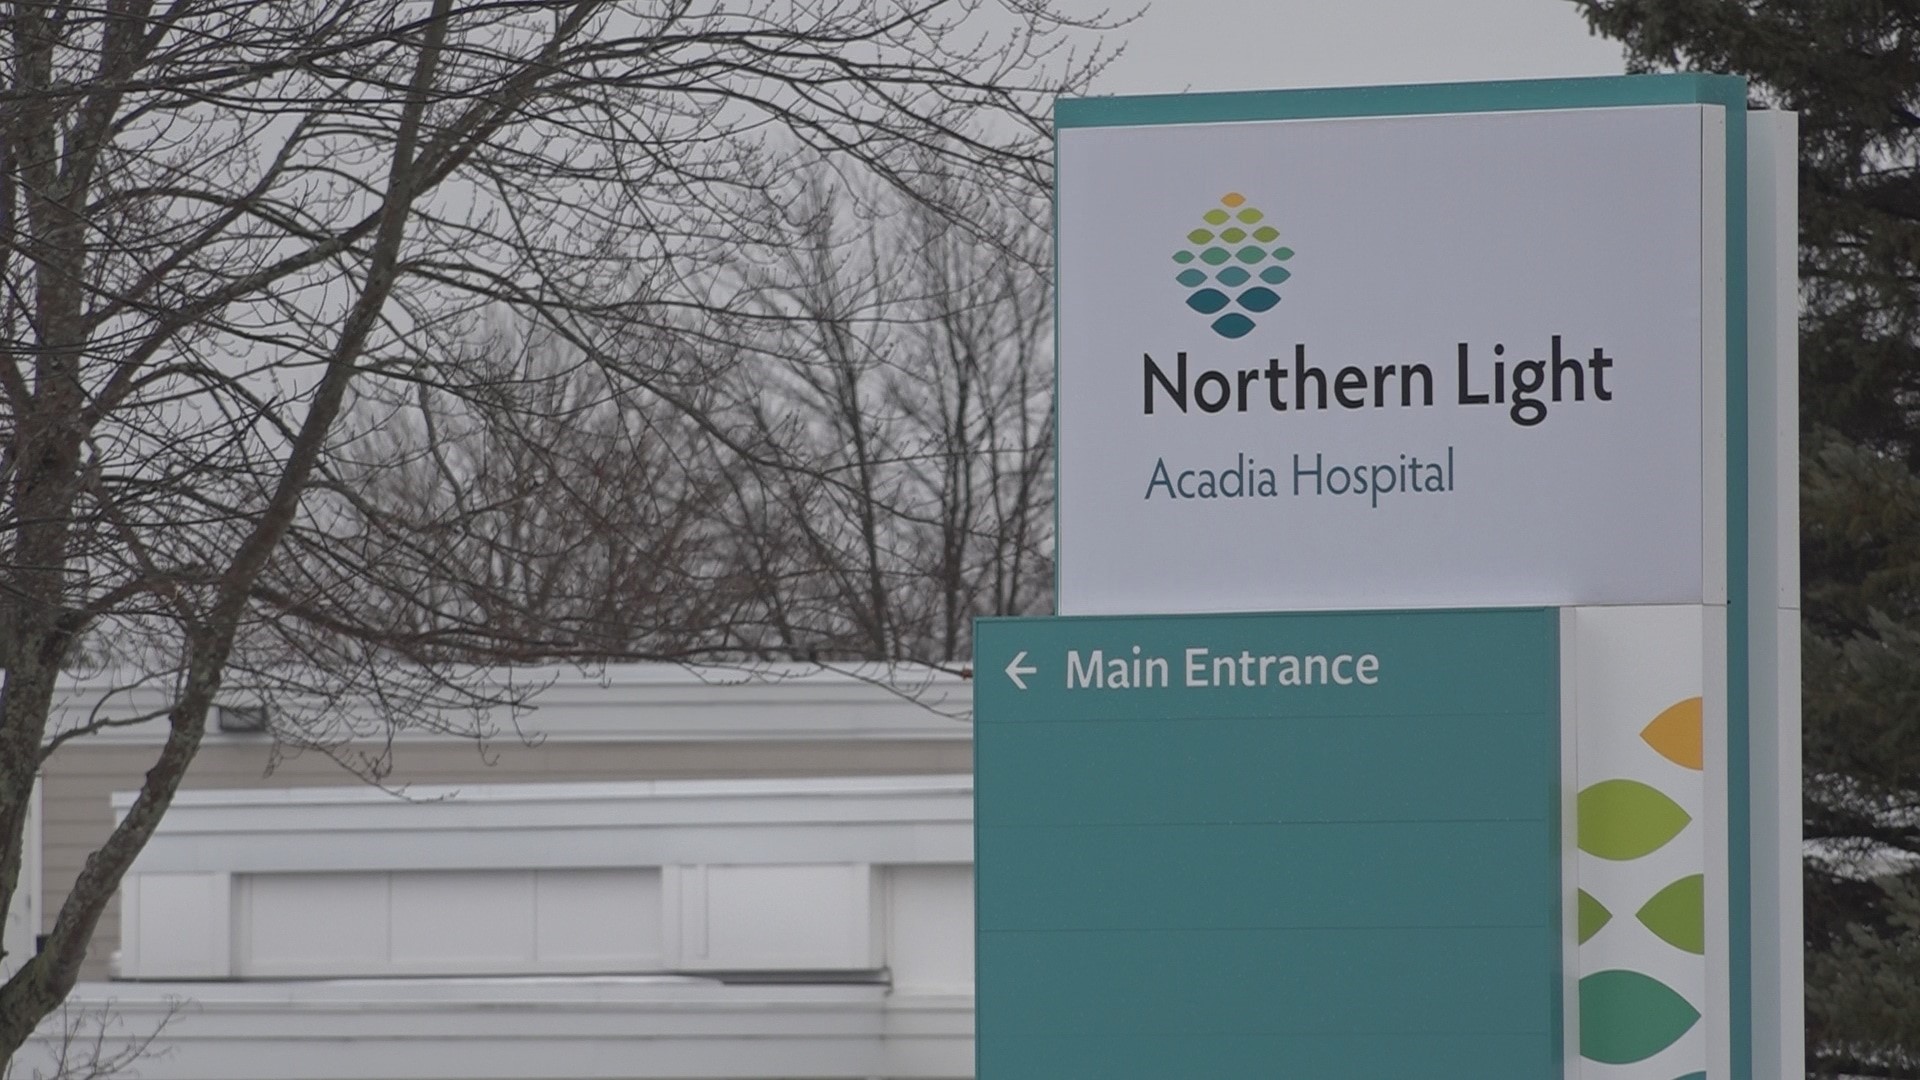 Northern Light Acadia Hospital's 'ride and apply' hiring event is happening on Wednesday, March 17 from 1-6 p.m. at 797 Wilson Street in Brewer.